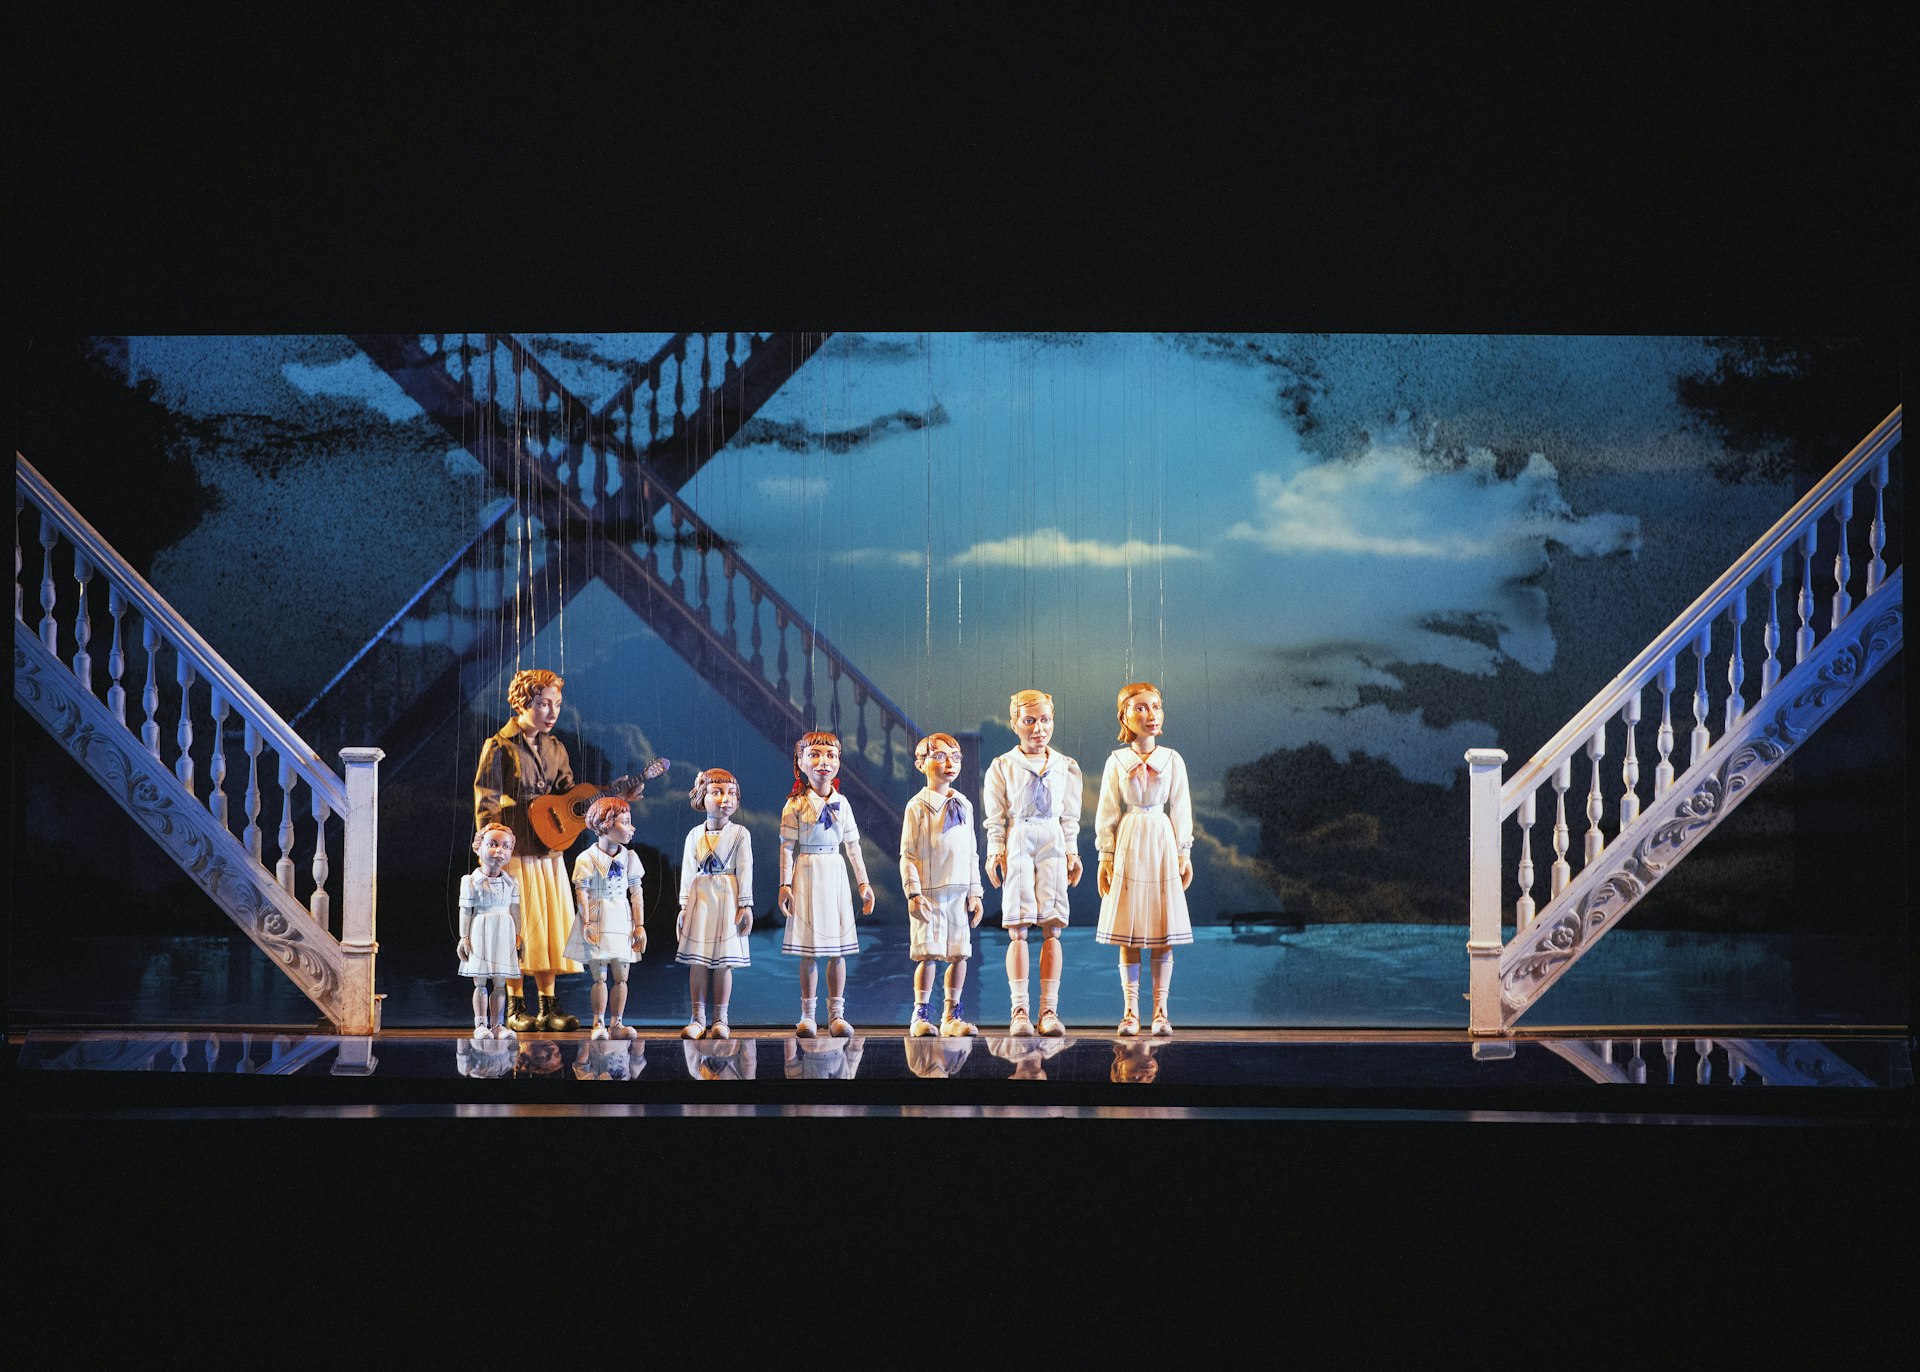 Marionettes at the Salzburger Marionettentheater performing Rodgers and Hammerstein’s The Sound of Music